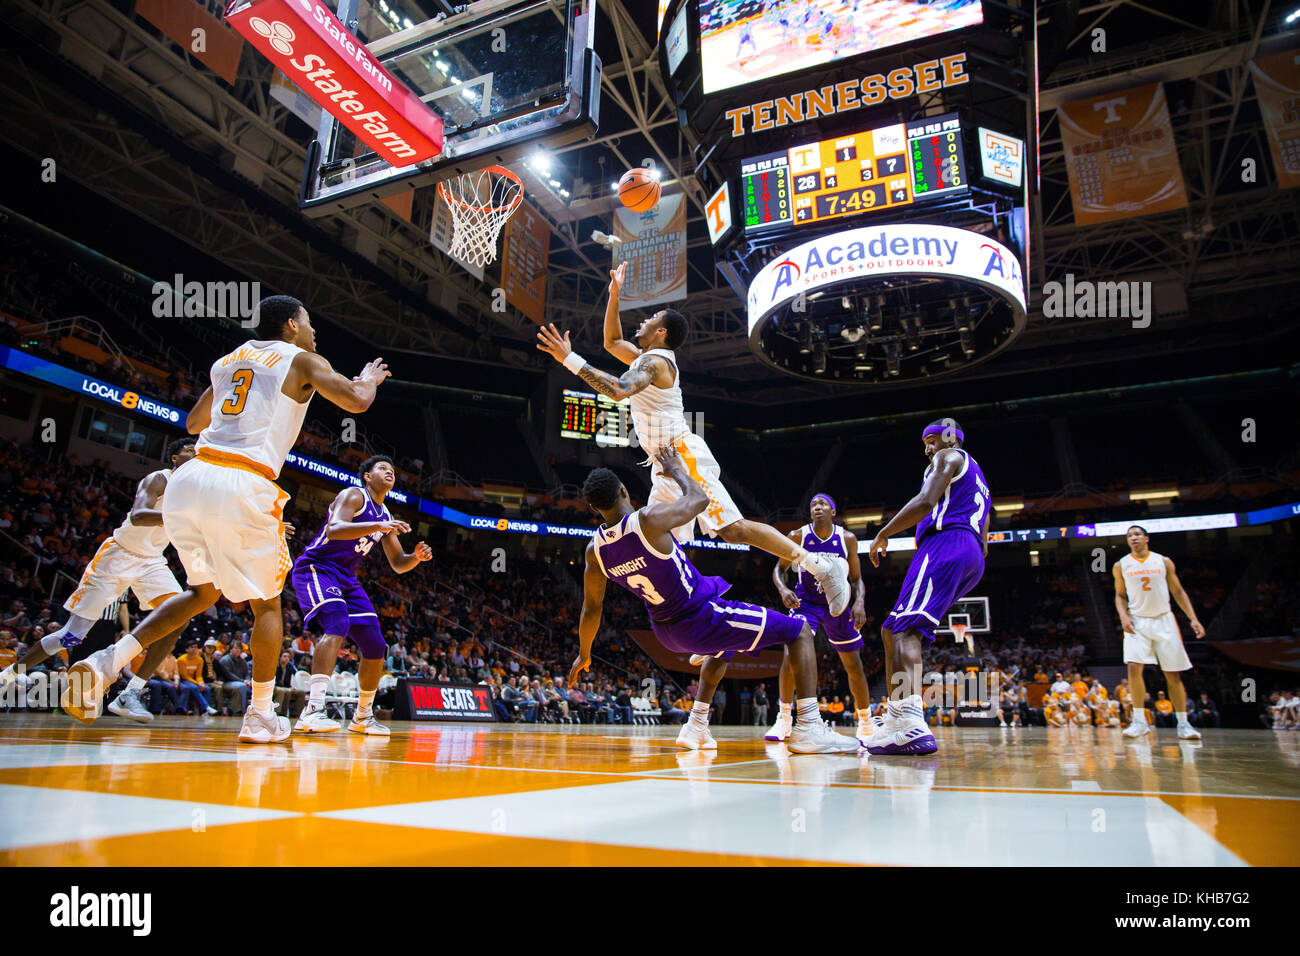 University of Tennessee, Tennessee November 14, 2017: Lamonte Turner #1 of the Tennessee Volunteers drives to the basket against Jamal Wright #3 of the High Point Panthers during the NCAA basketball game between the University of Tennessee Volunteers and the High Point University Panthers at Thompson Boling Arena in Knoxville TN Tim Gangloff/CSM Stock Photo